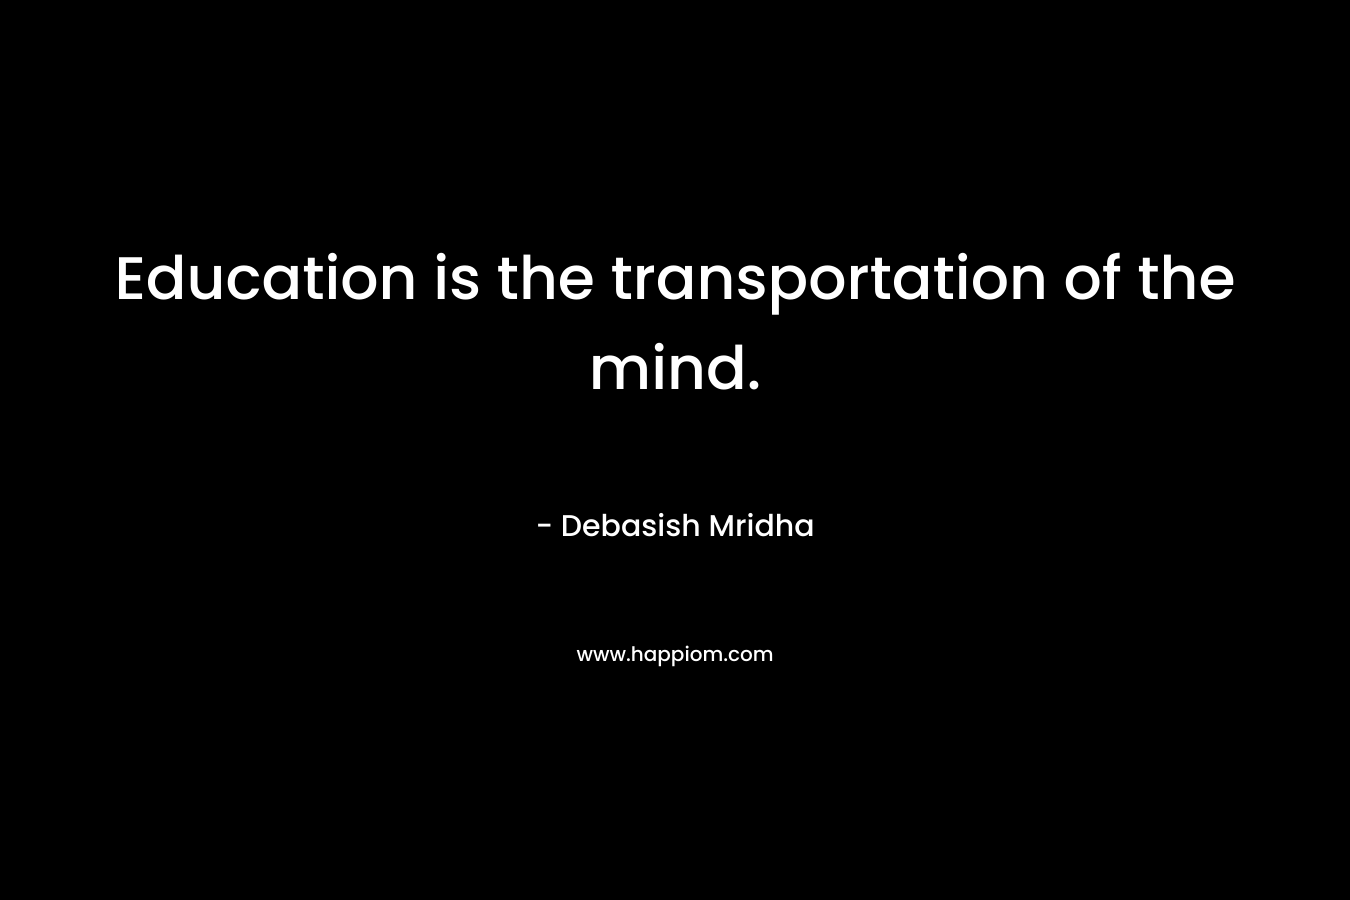 Education is the transportation of the mind.